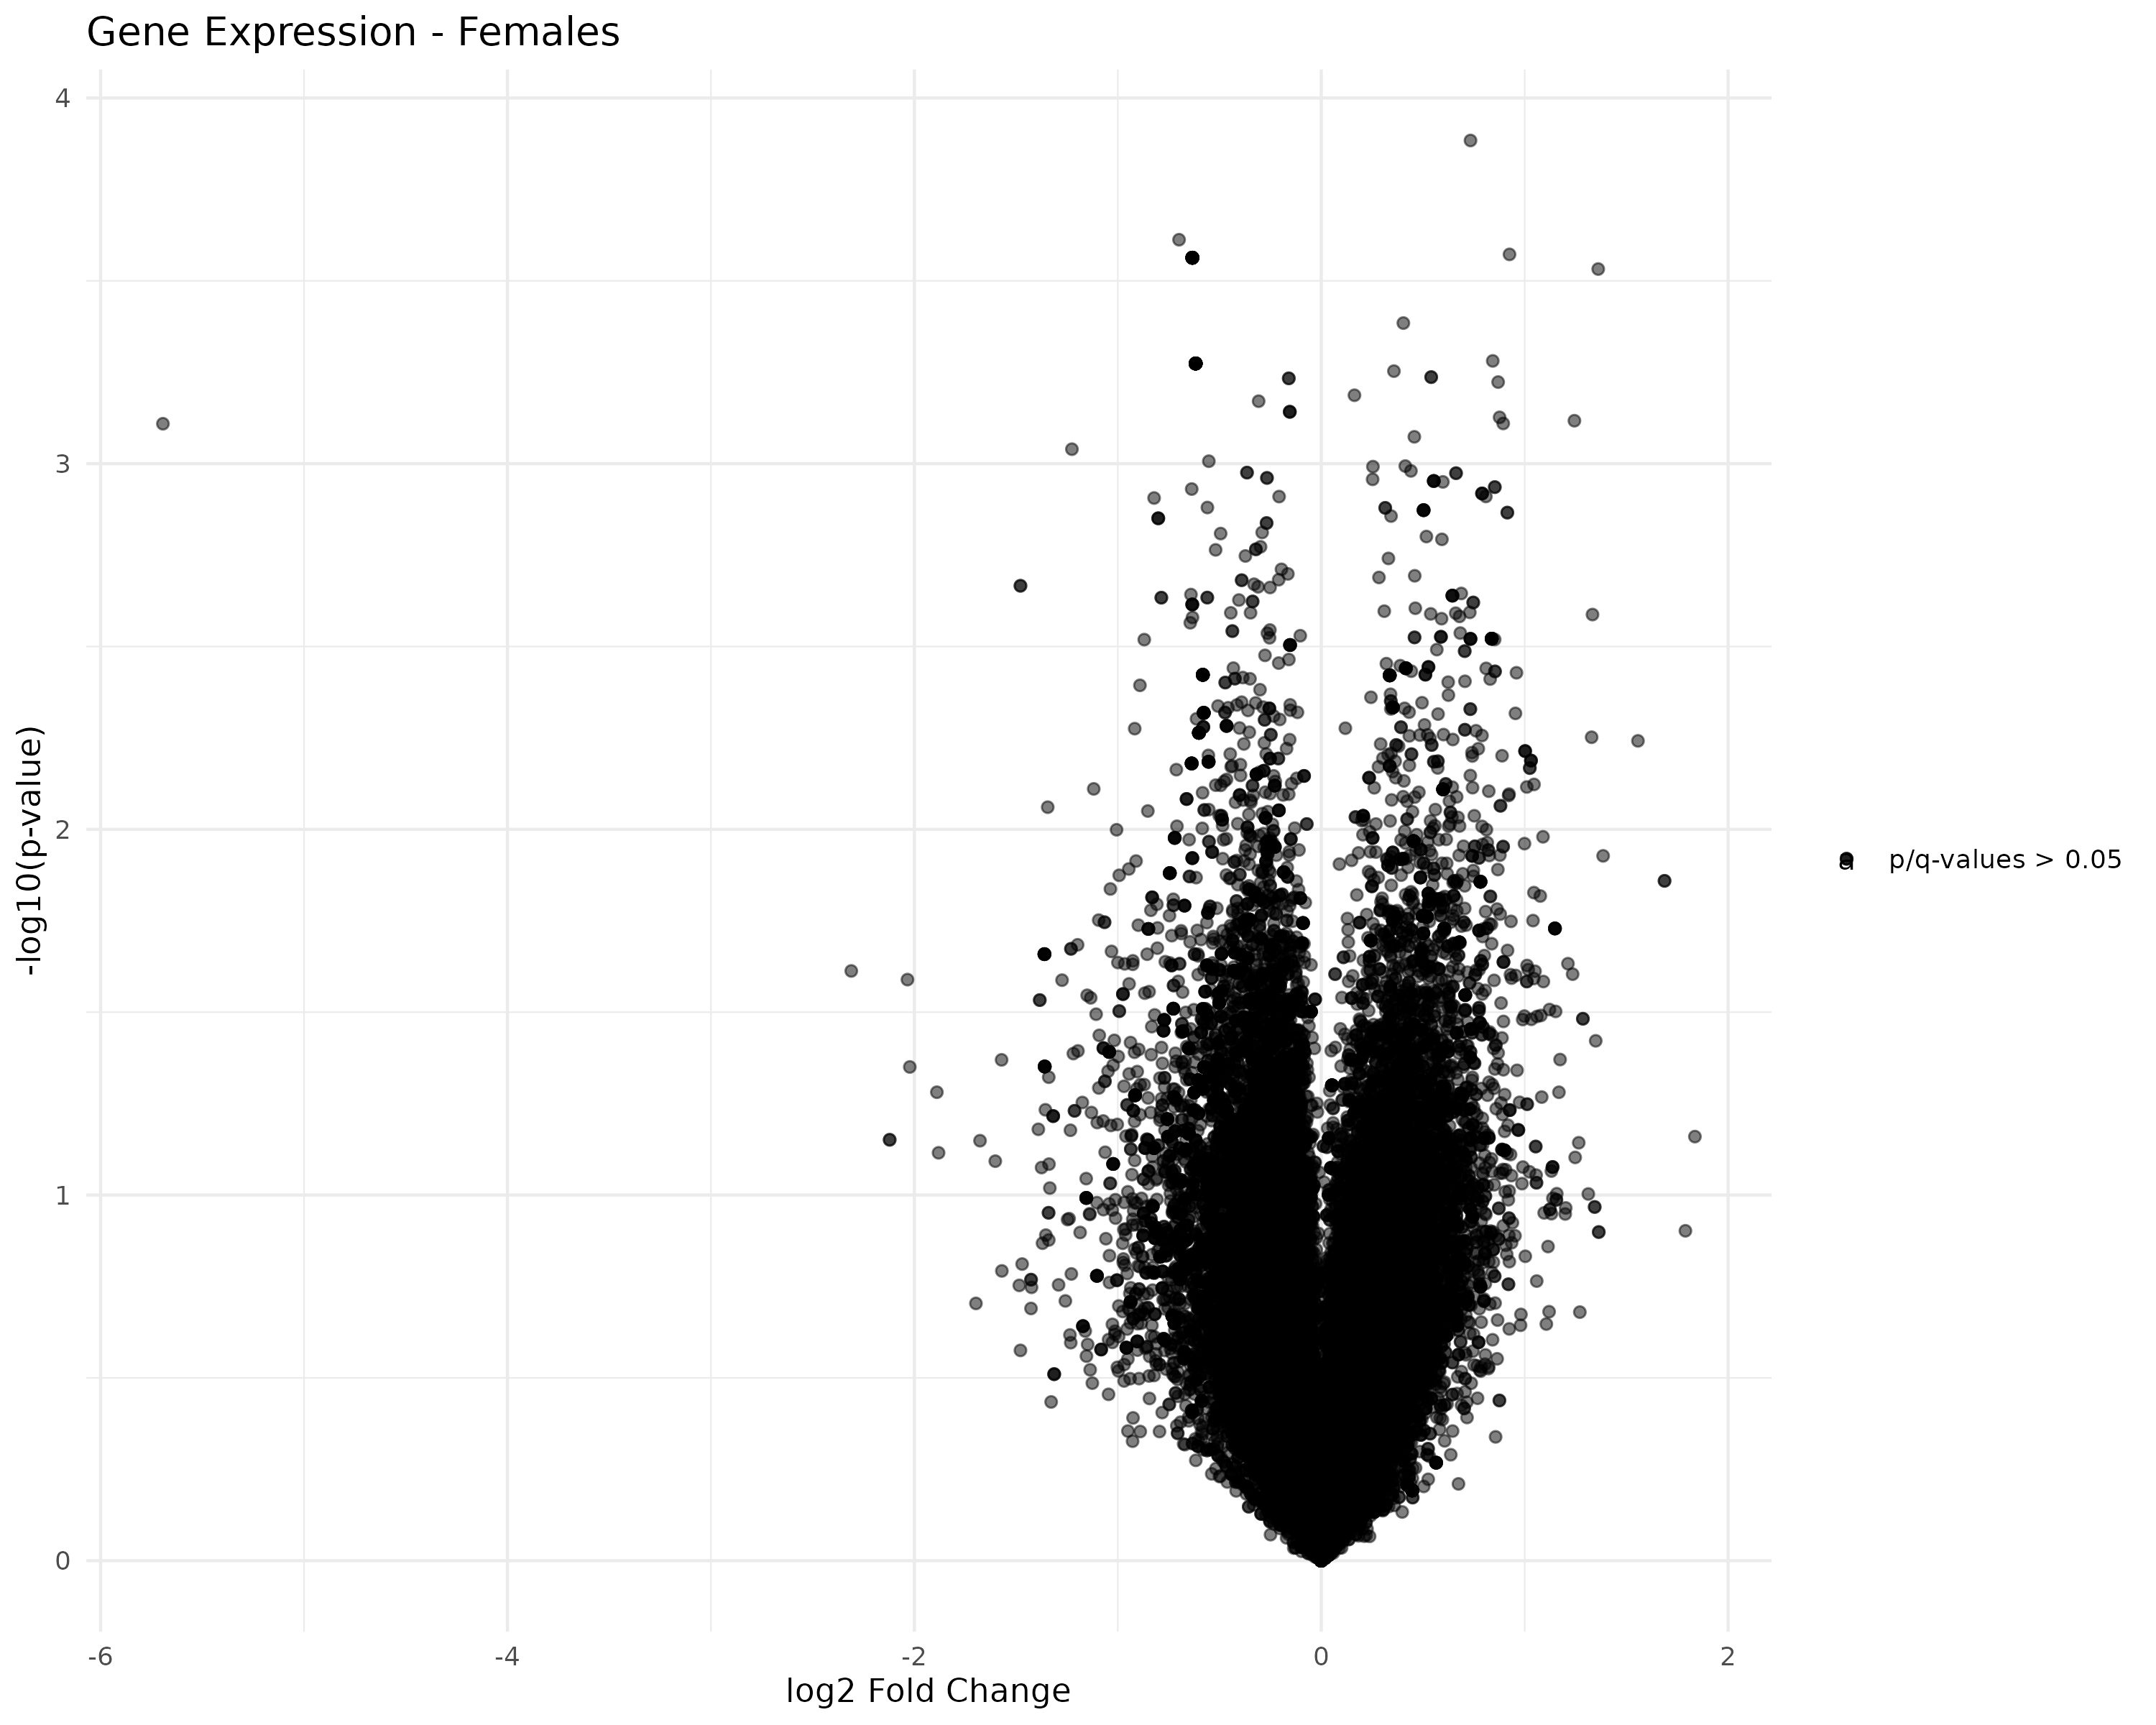 Volcano plot of gene expression in females. No genes are differentially expressed. Grey points are genes with p-values <=0.05. Black points are genes with p/q-values > 0.05.